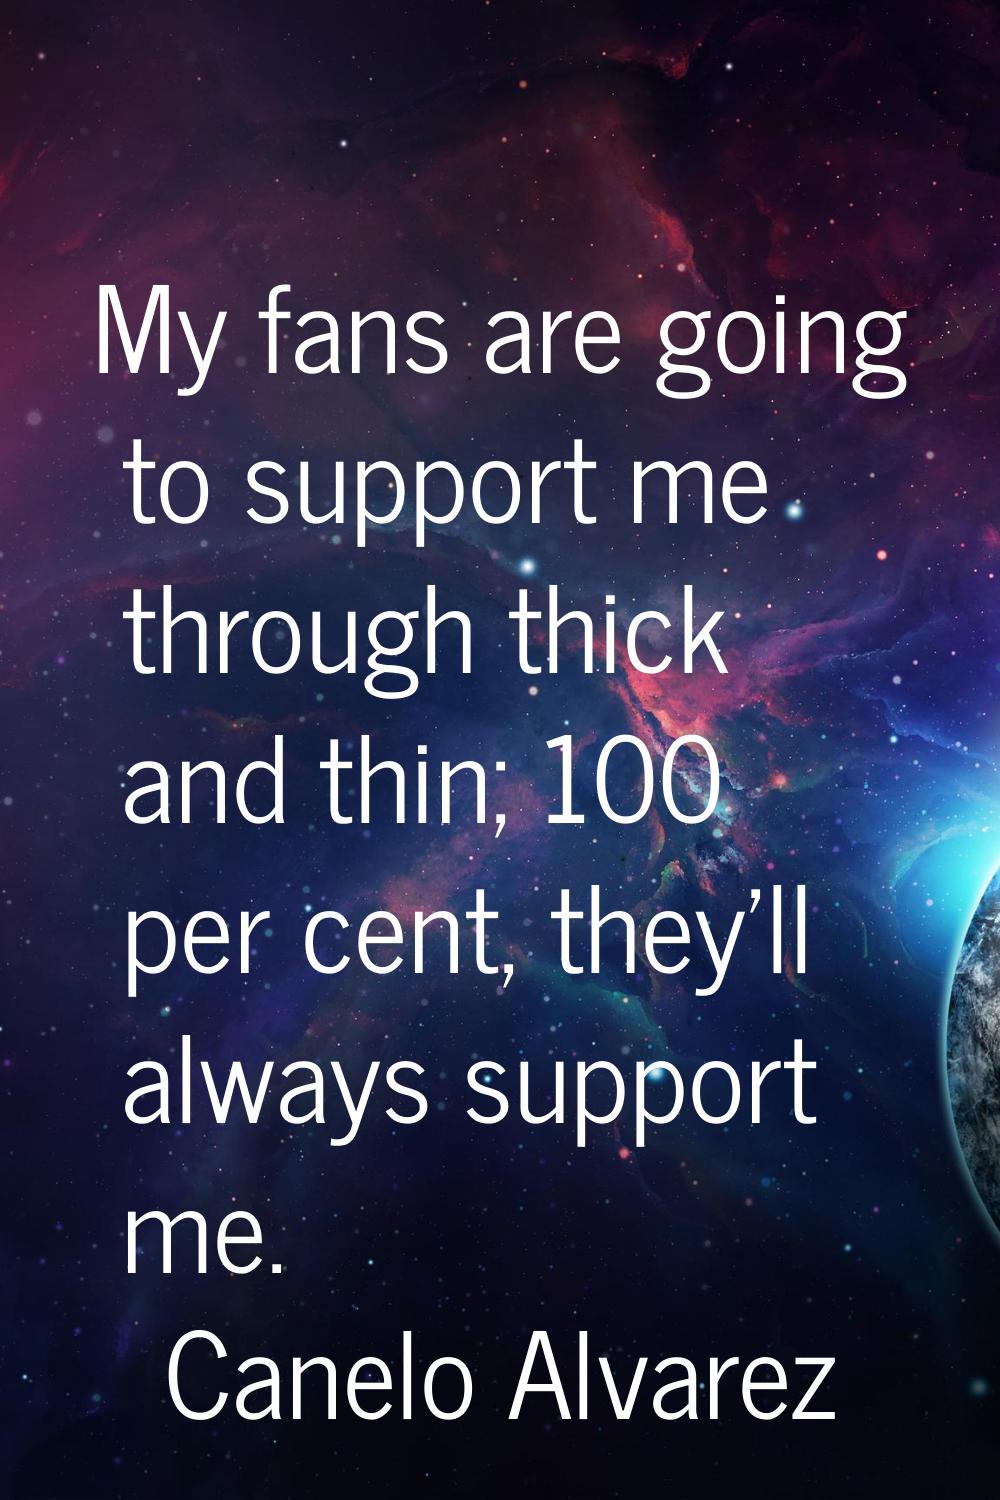 My fans are going to support me through thick and thin; 100 per cent, they'll always support me.